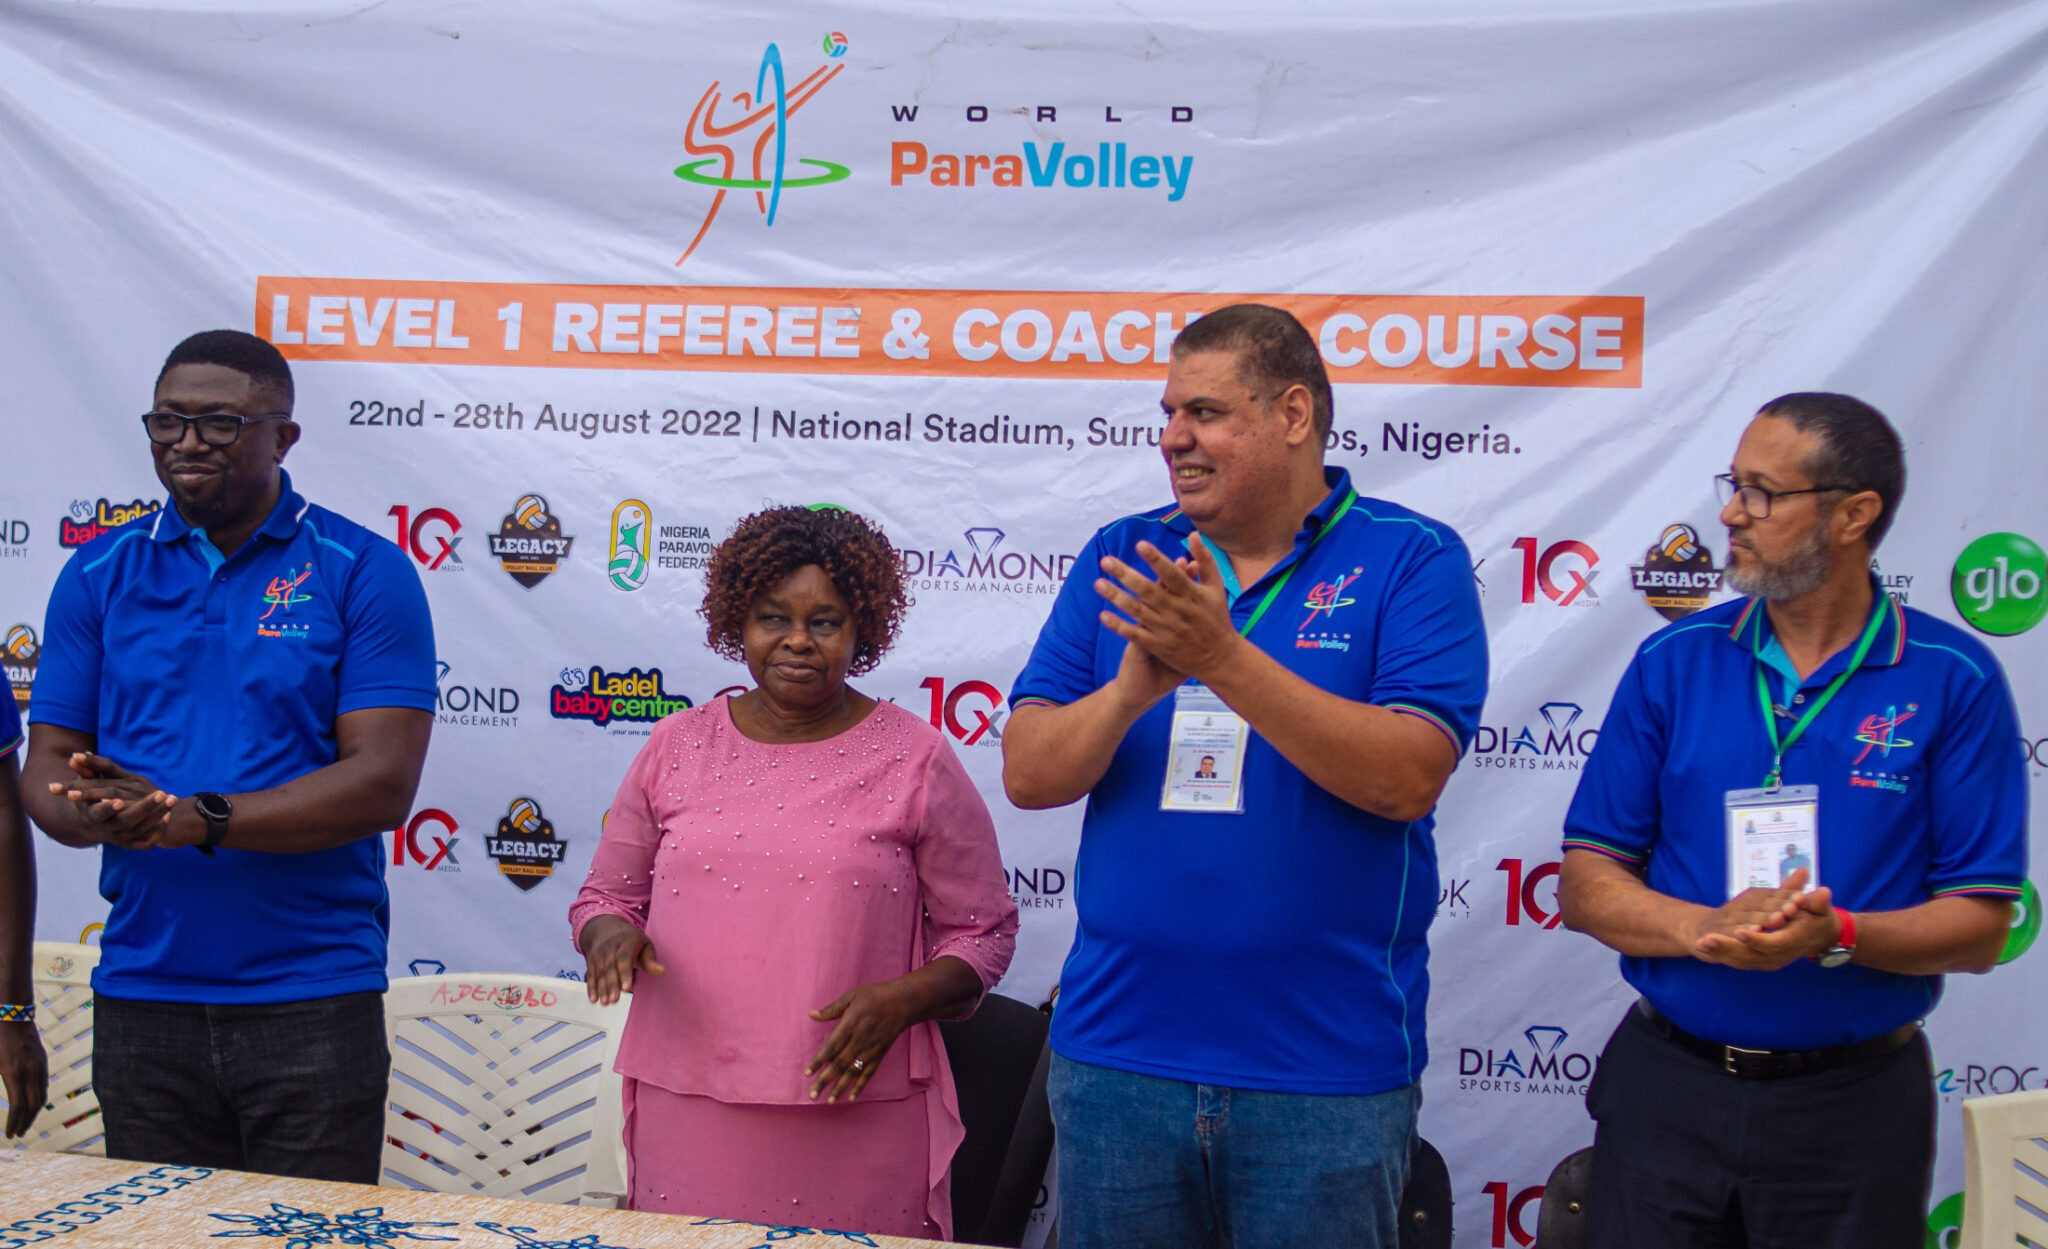 Nigeria hosts World ParaVolley refereeing and coaching courses